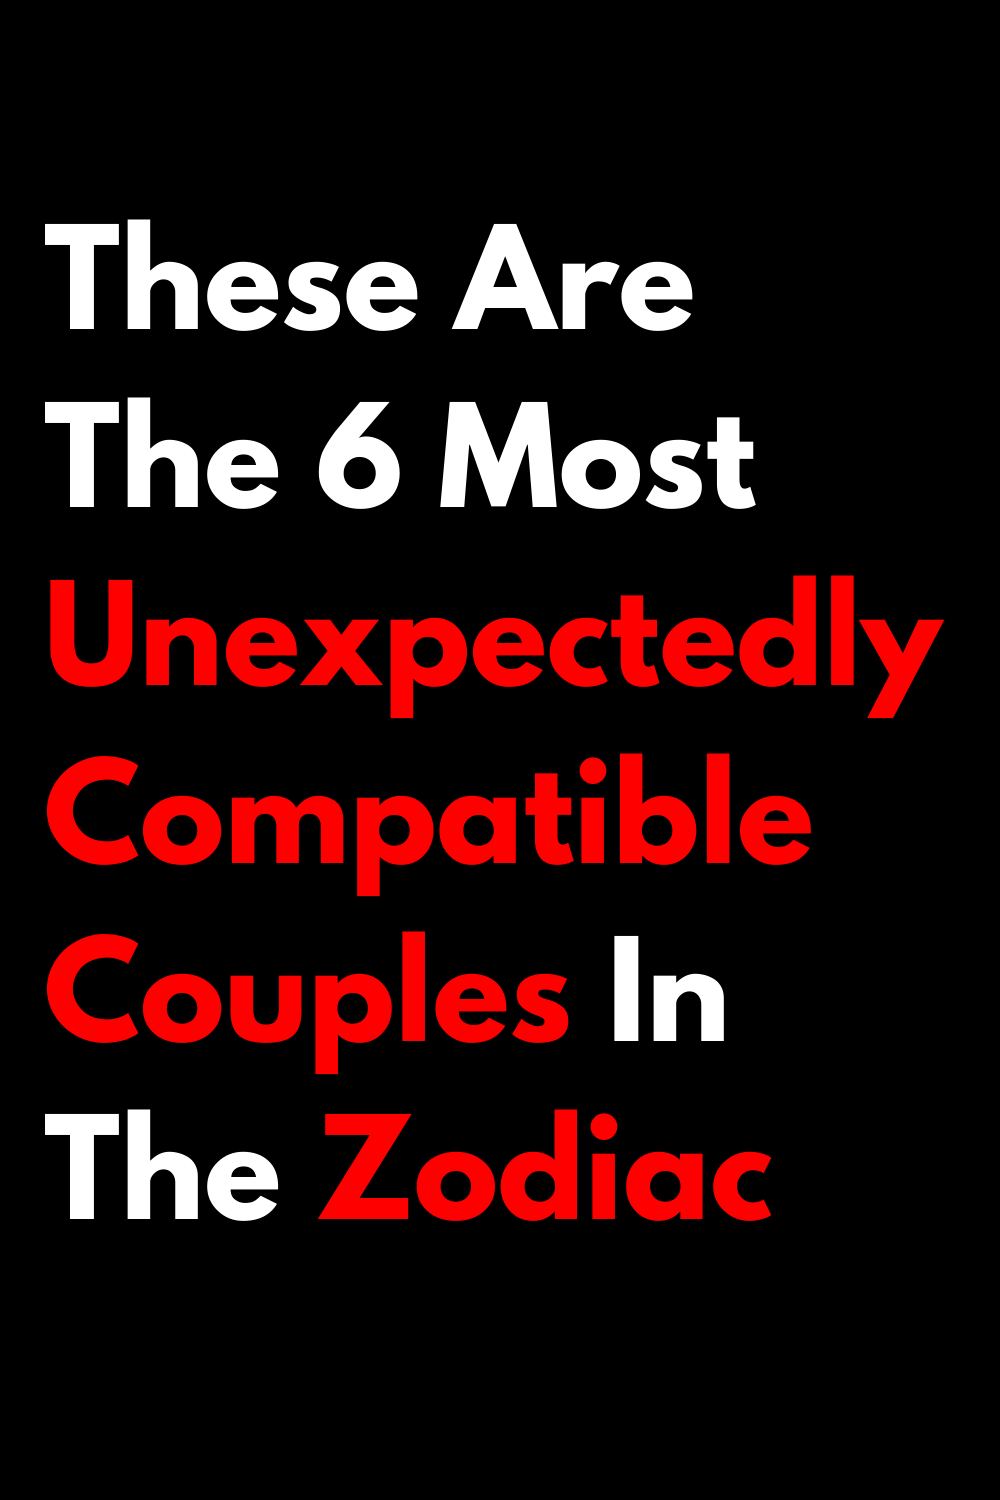 These Are The 6 Most Unexpectedly Compatible Couples In The Zodiac